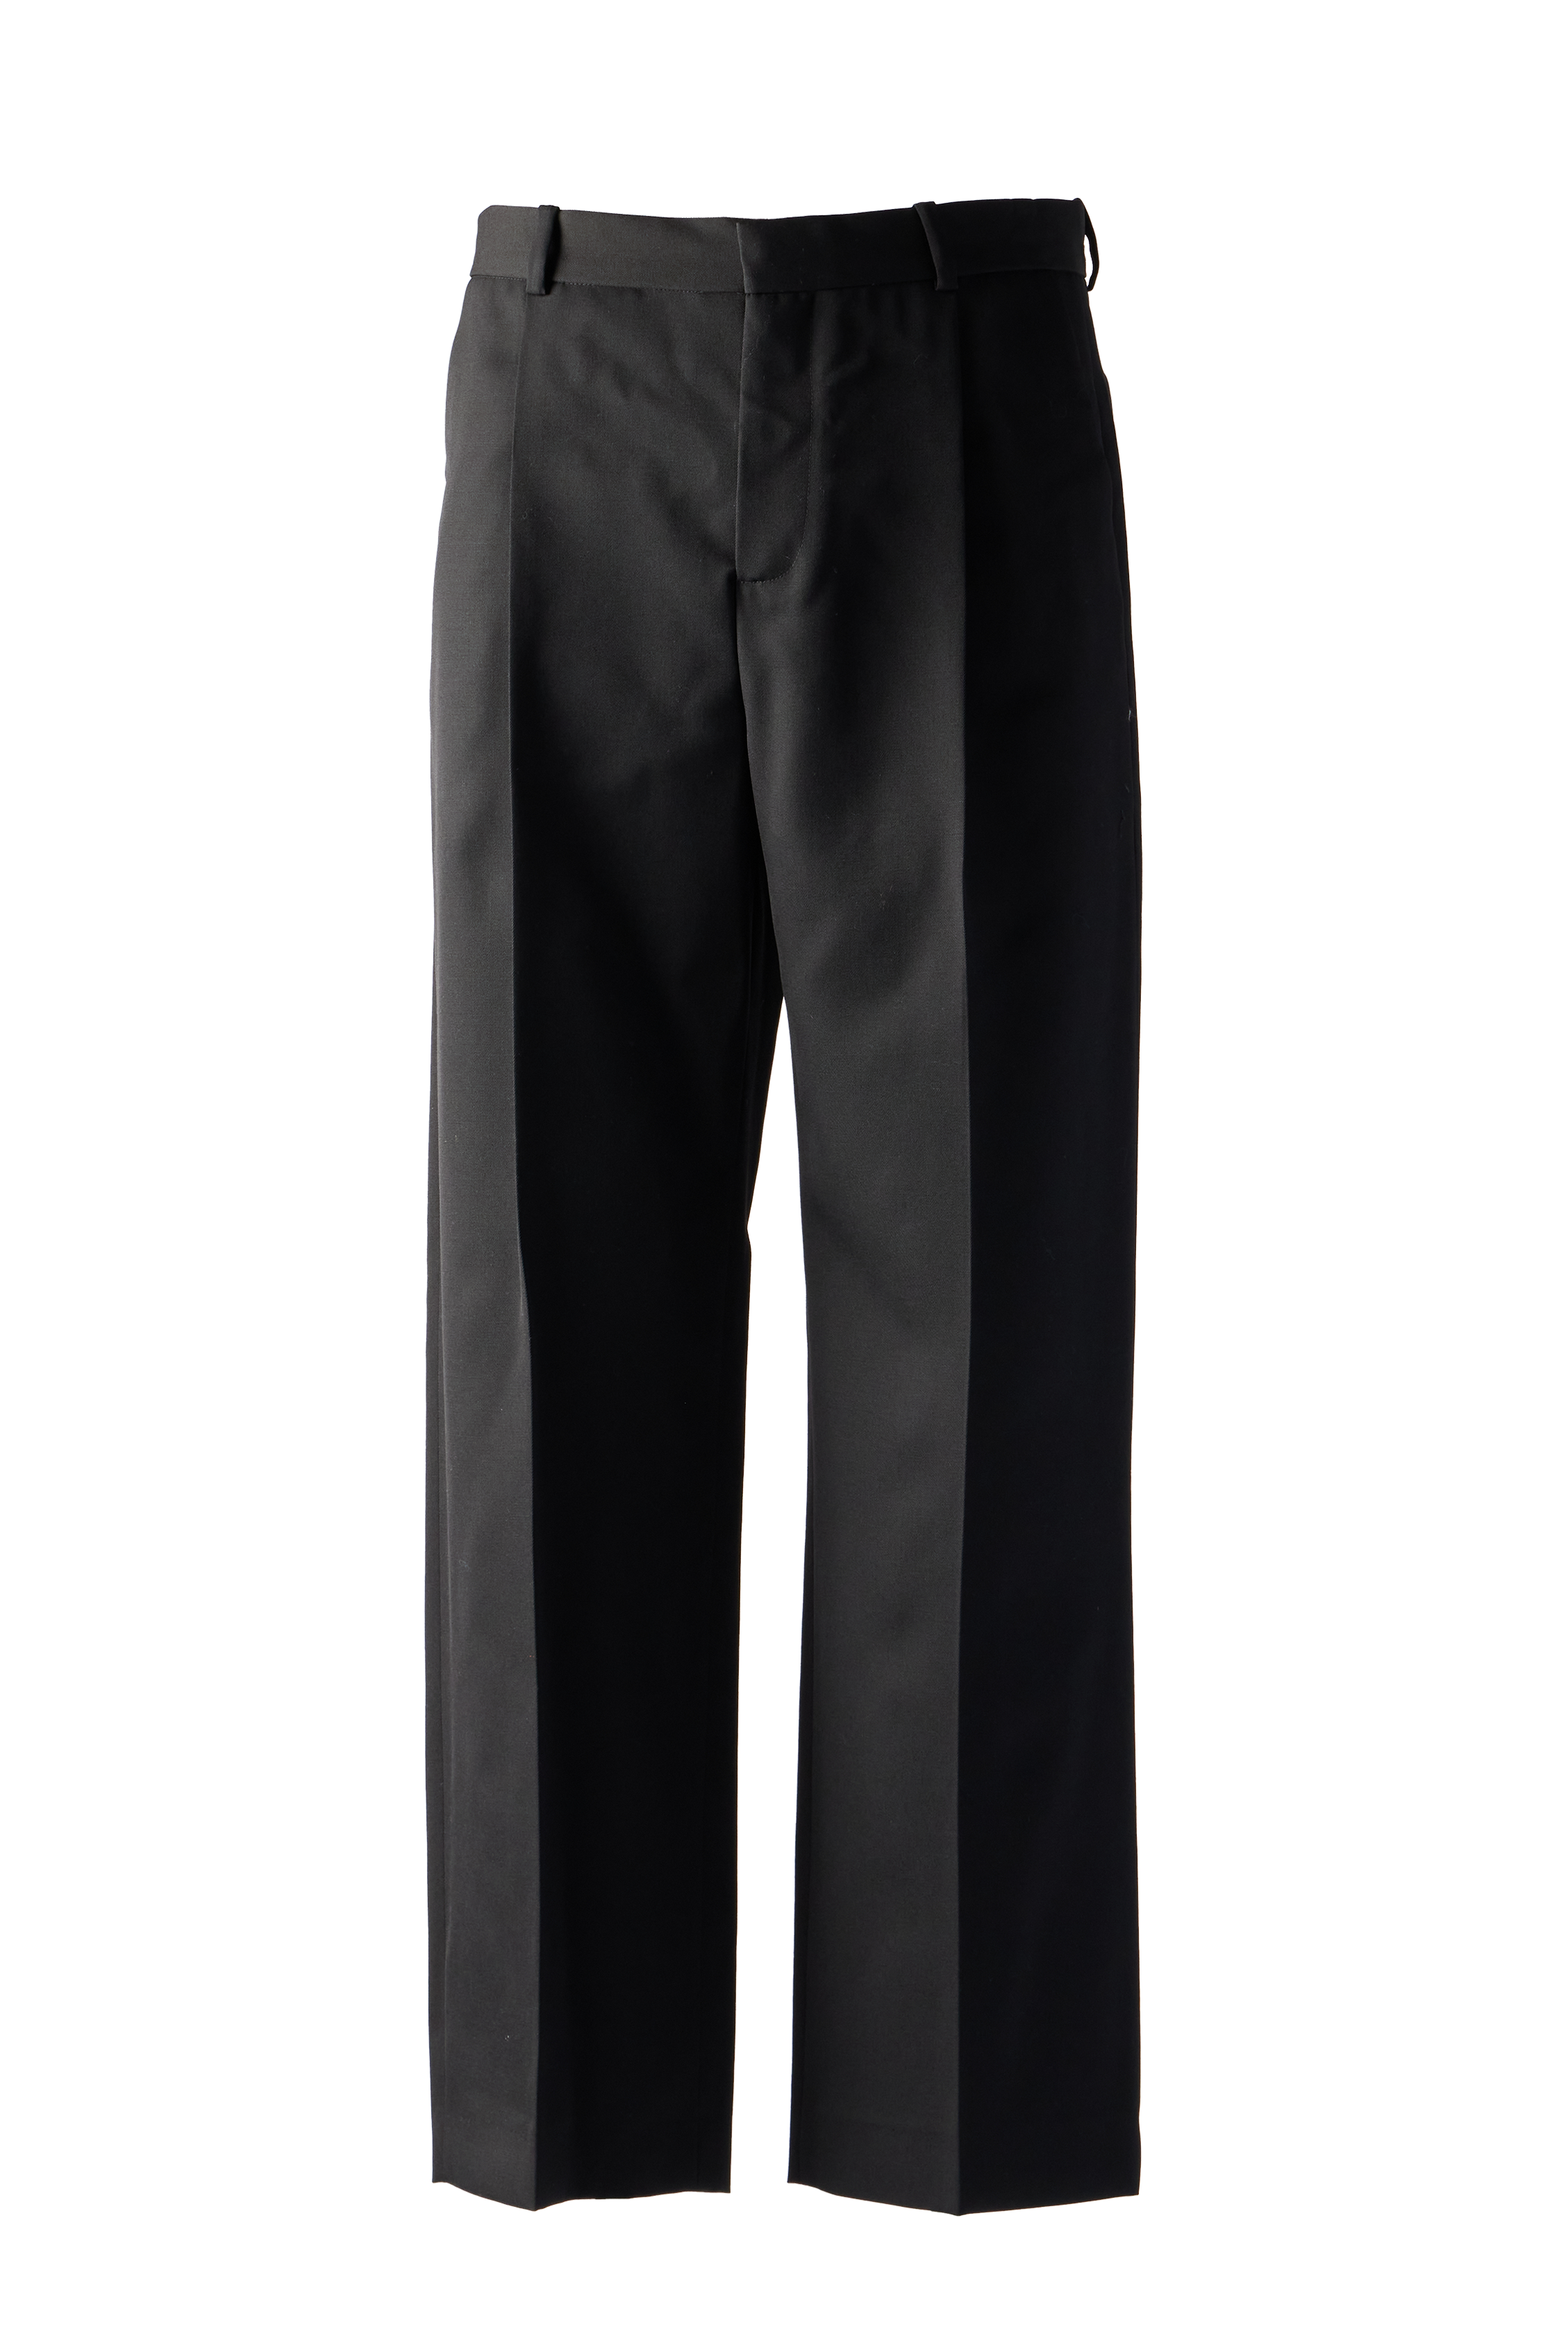 BOTTER - Classic Pleated Trouser product image